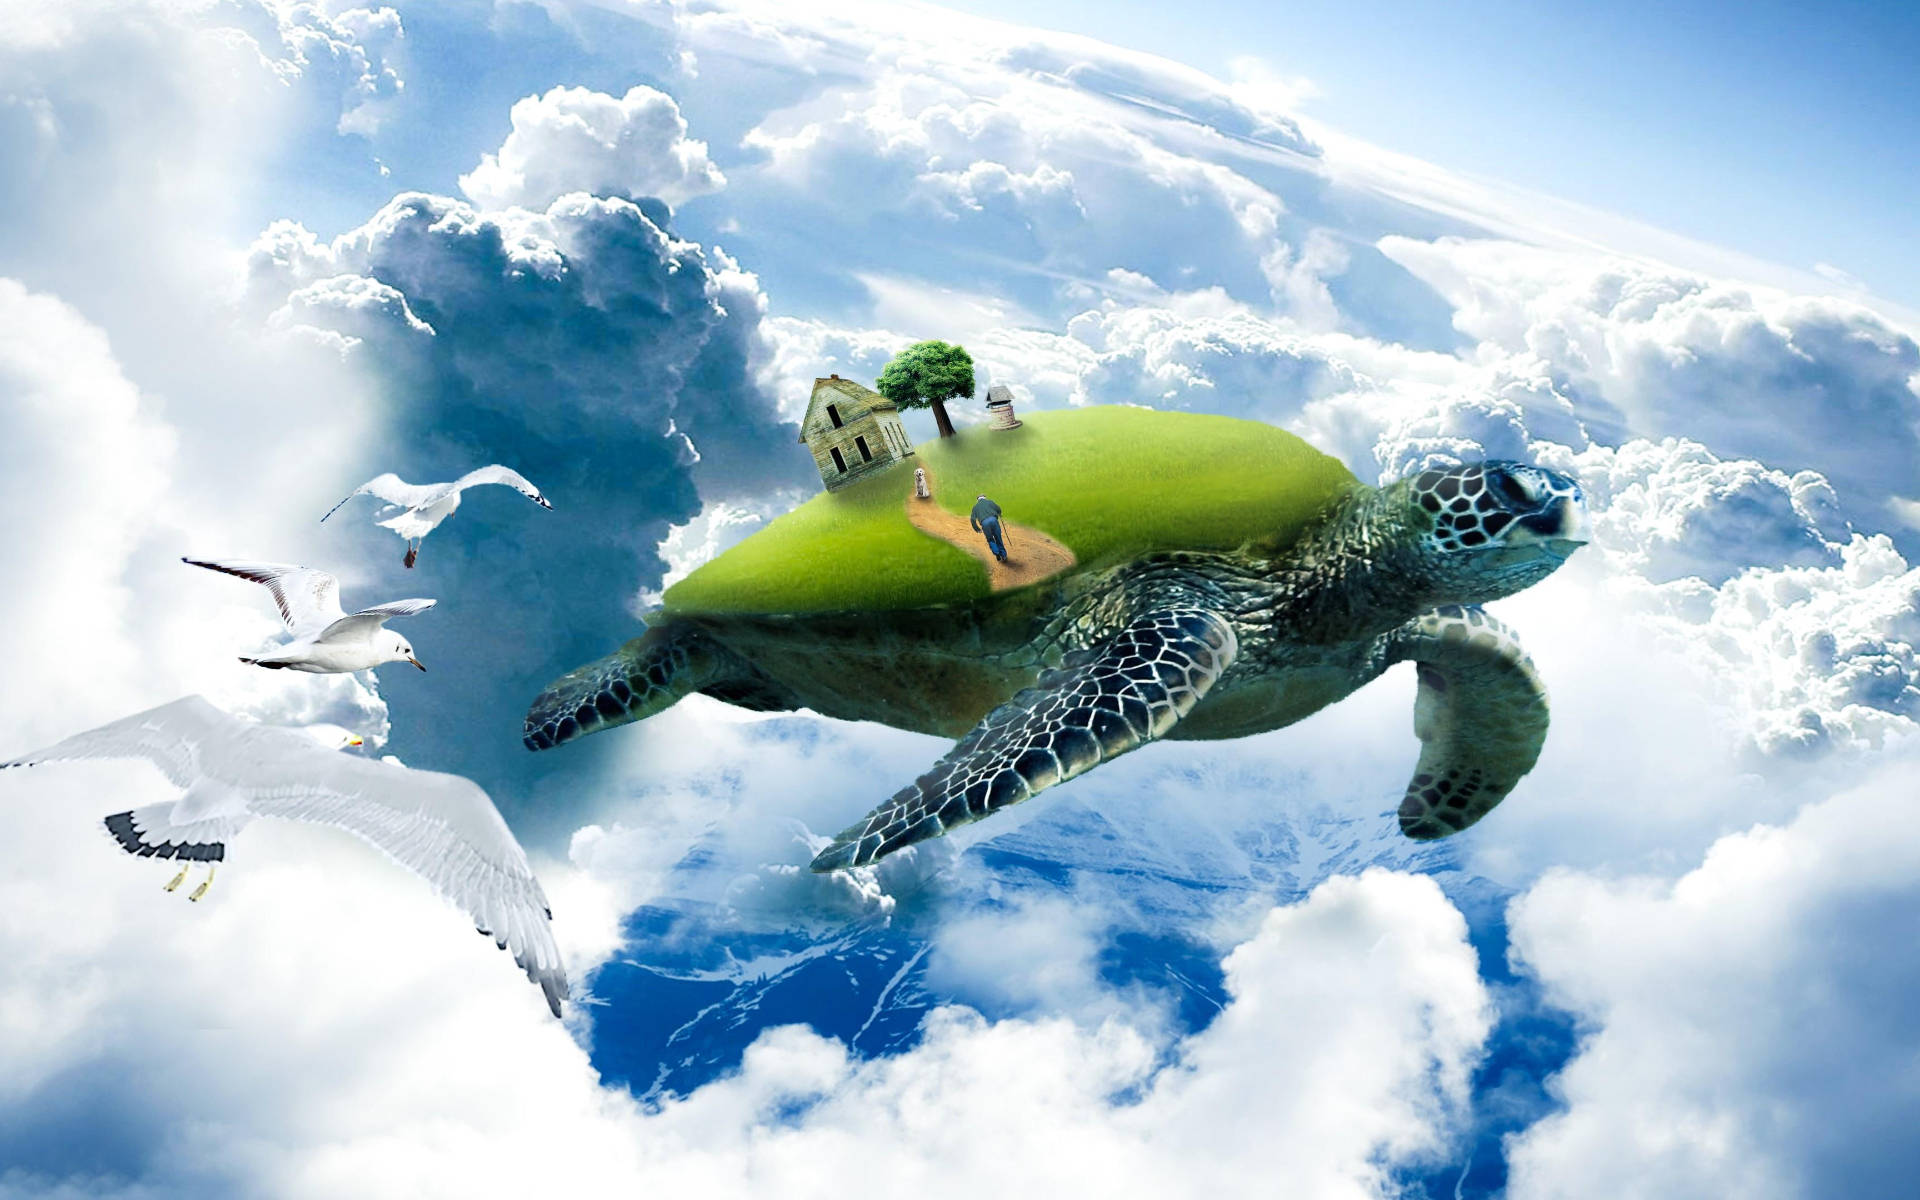 Free Cool Turtle Wallpaper Downloads, Cool Turtle Wallpaper for FREE